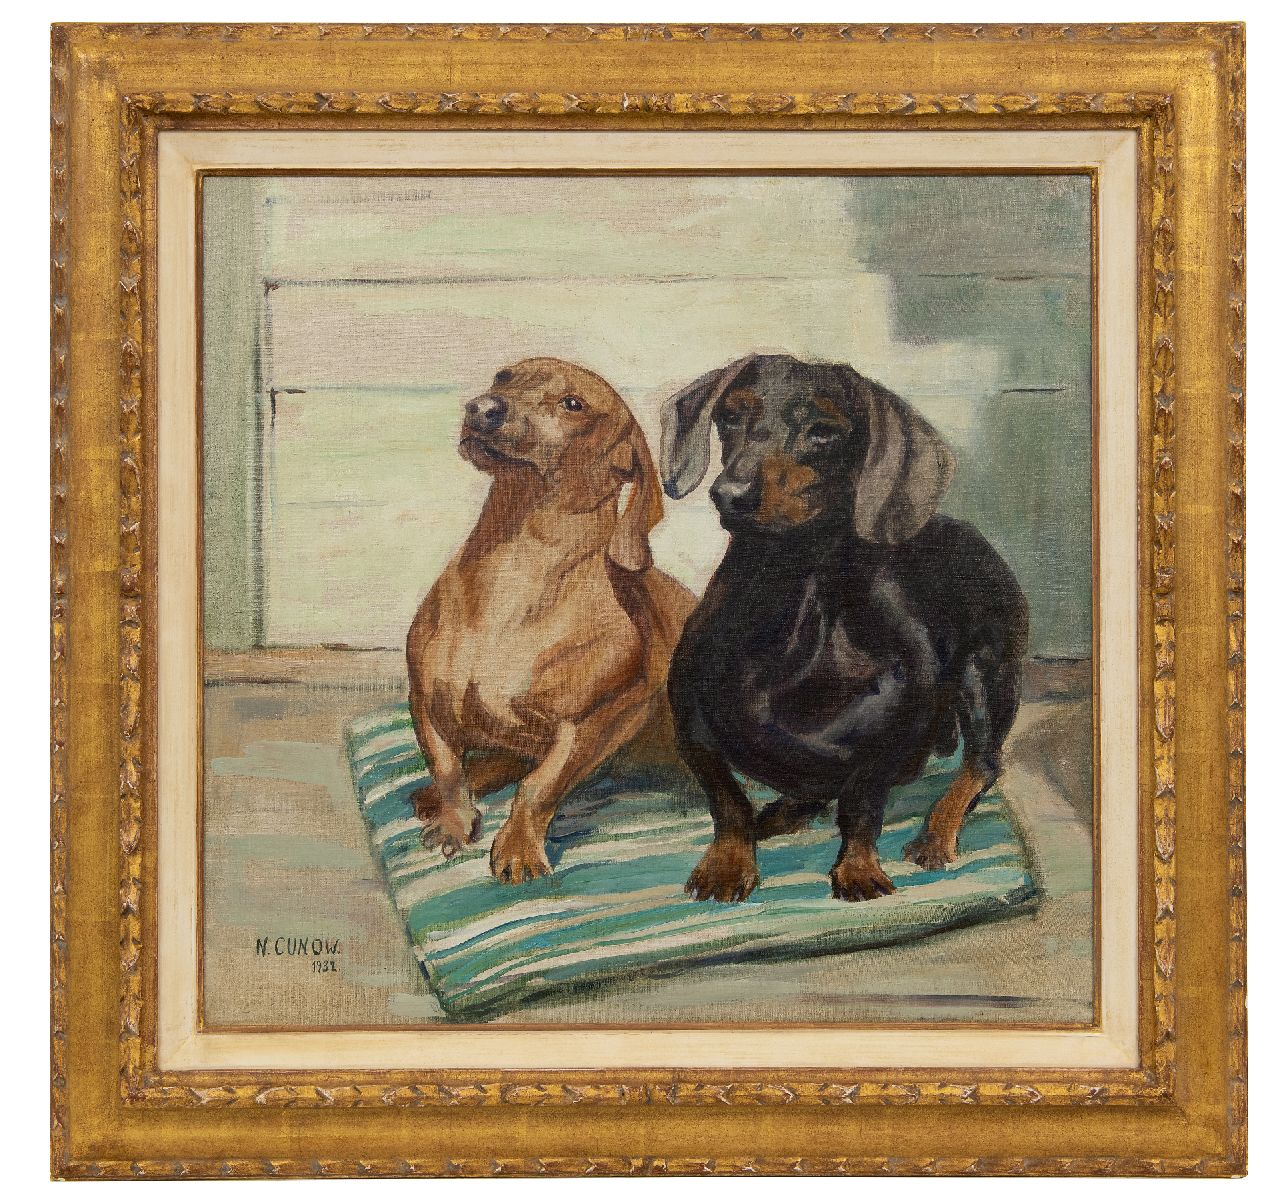 Cunow-Detjen N.  | Nelly Cunow-Detjen | Paintings offered for sale | Two short-haired Dachshunds, oil on canvas 54.0 x 56.5 cm, signed l.l. and dated 1932